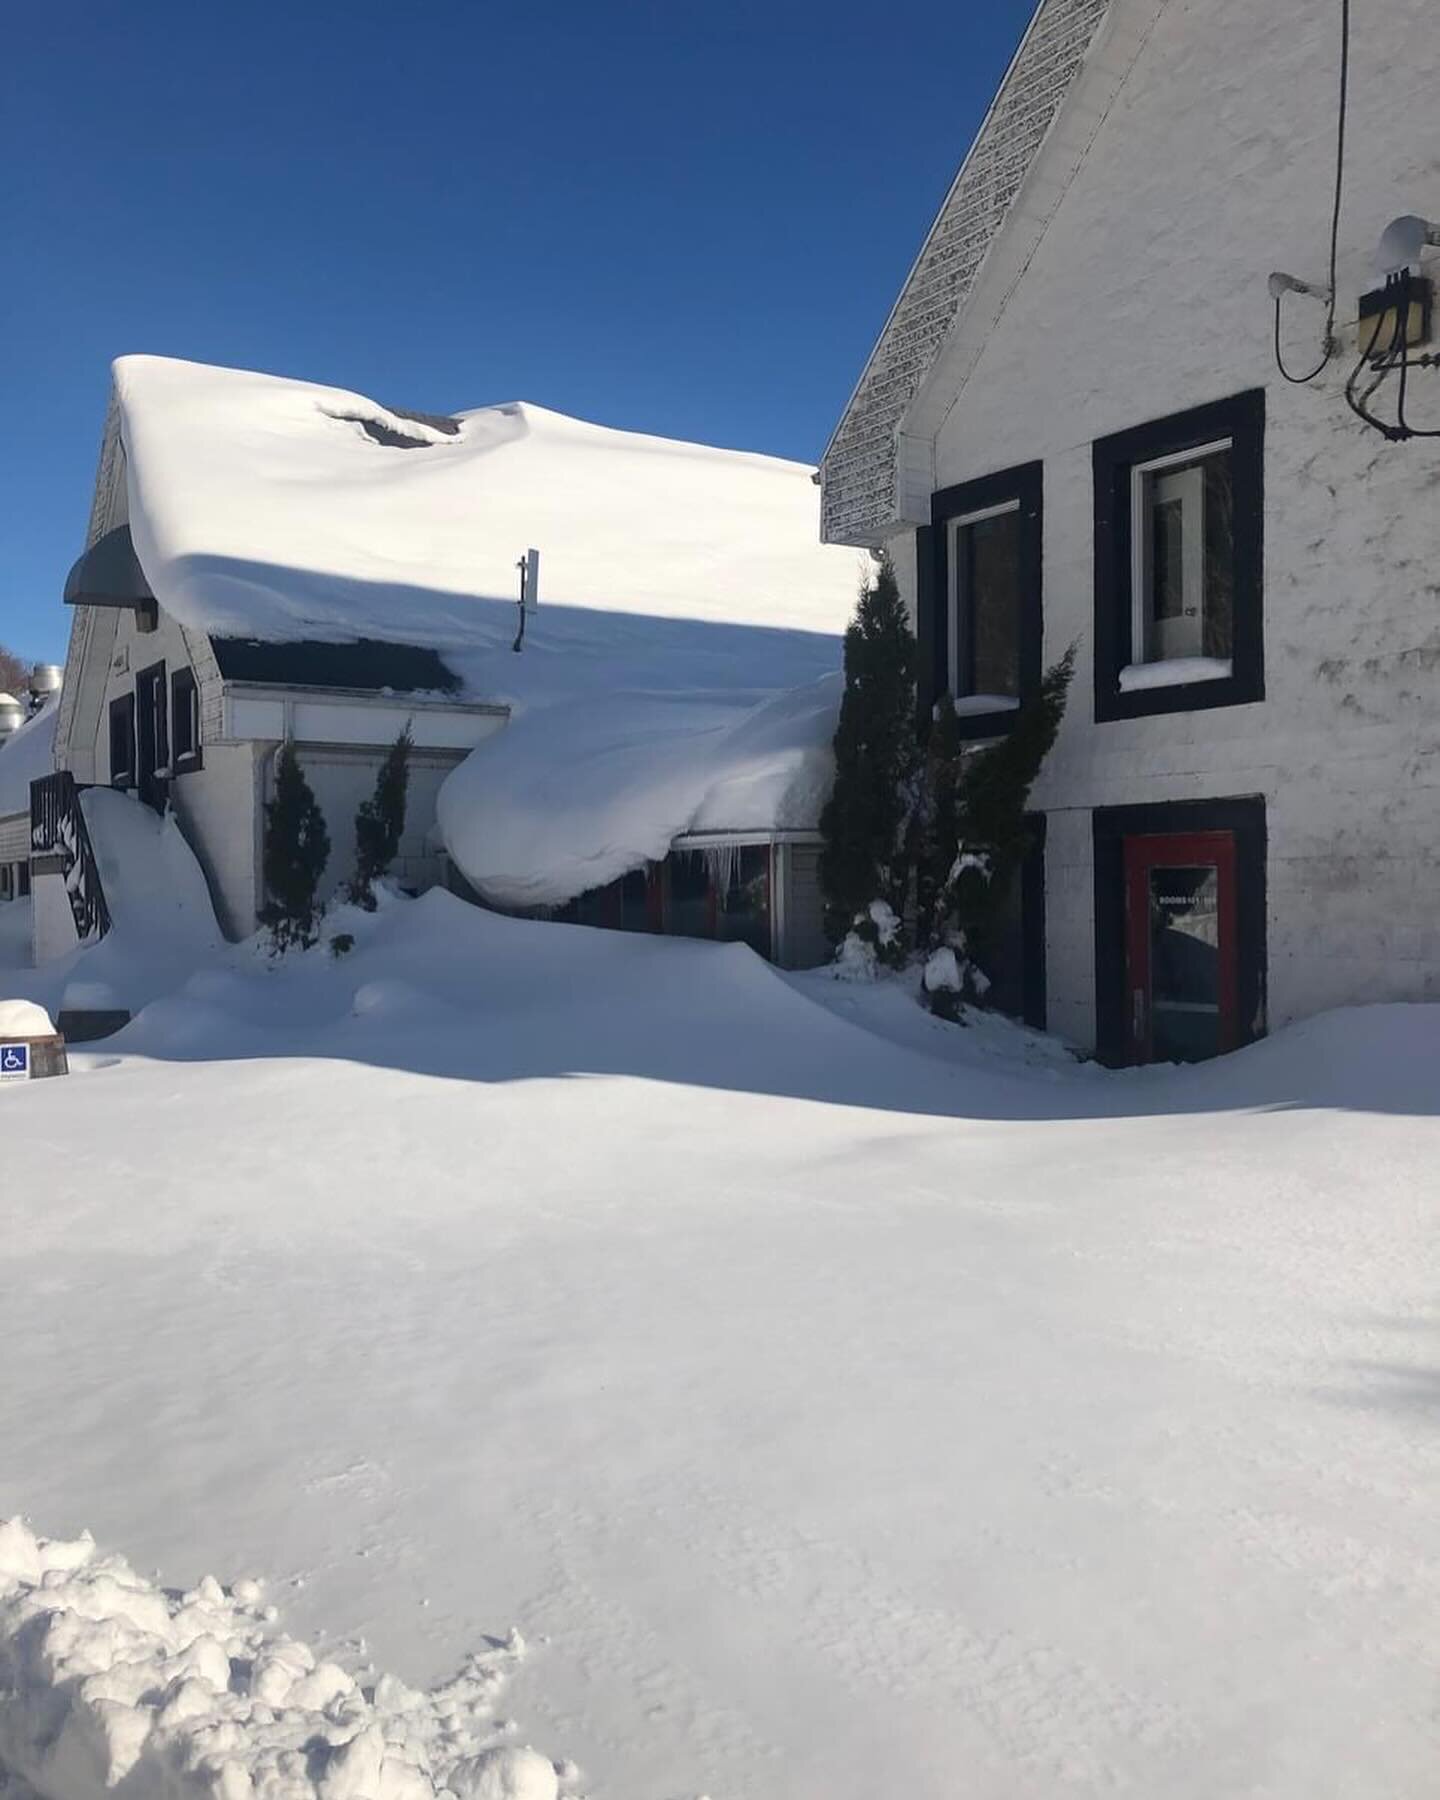 Clearing snow took up much of the guys&rsquo; time this week; they had to tackle that flat roof too. Check out these comparisons between what it looked like pre-clearance versus post-. Now if you don&rsquo;t mind...breaktime! #capebreton #whiskydisti